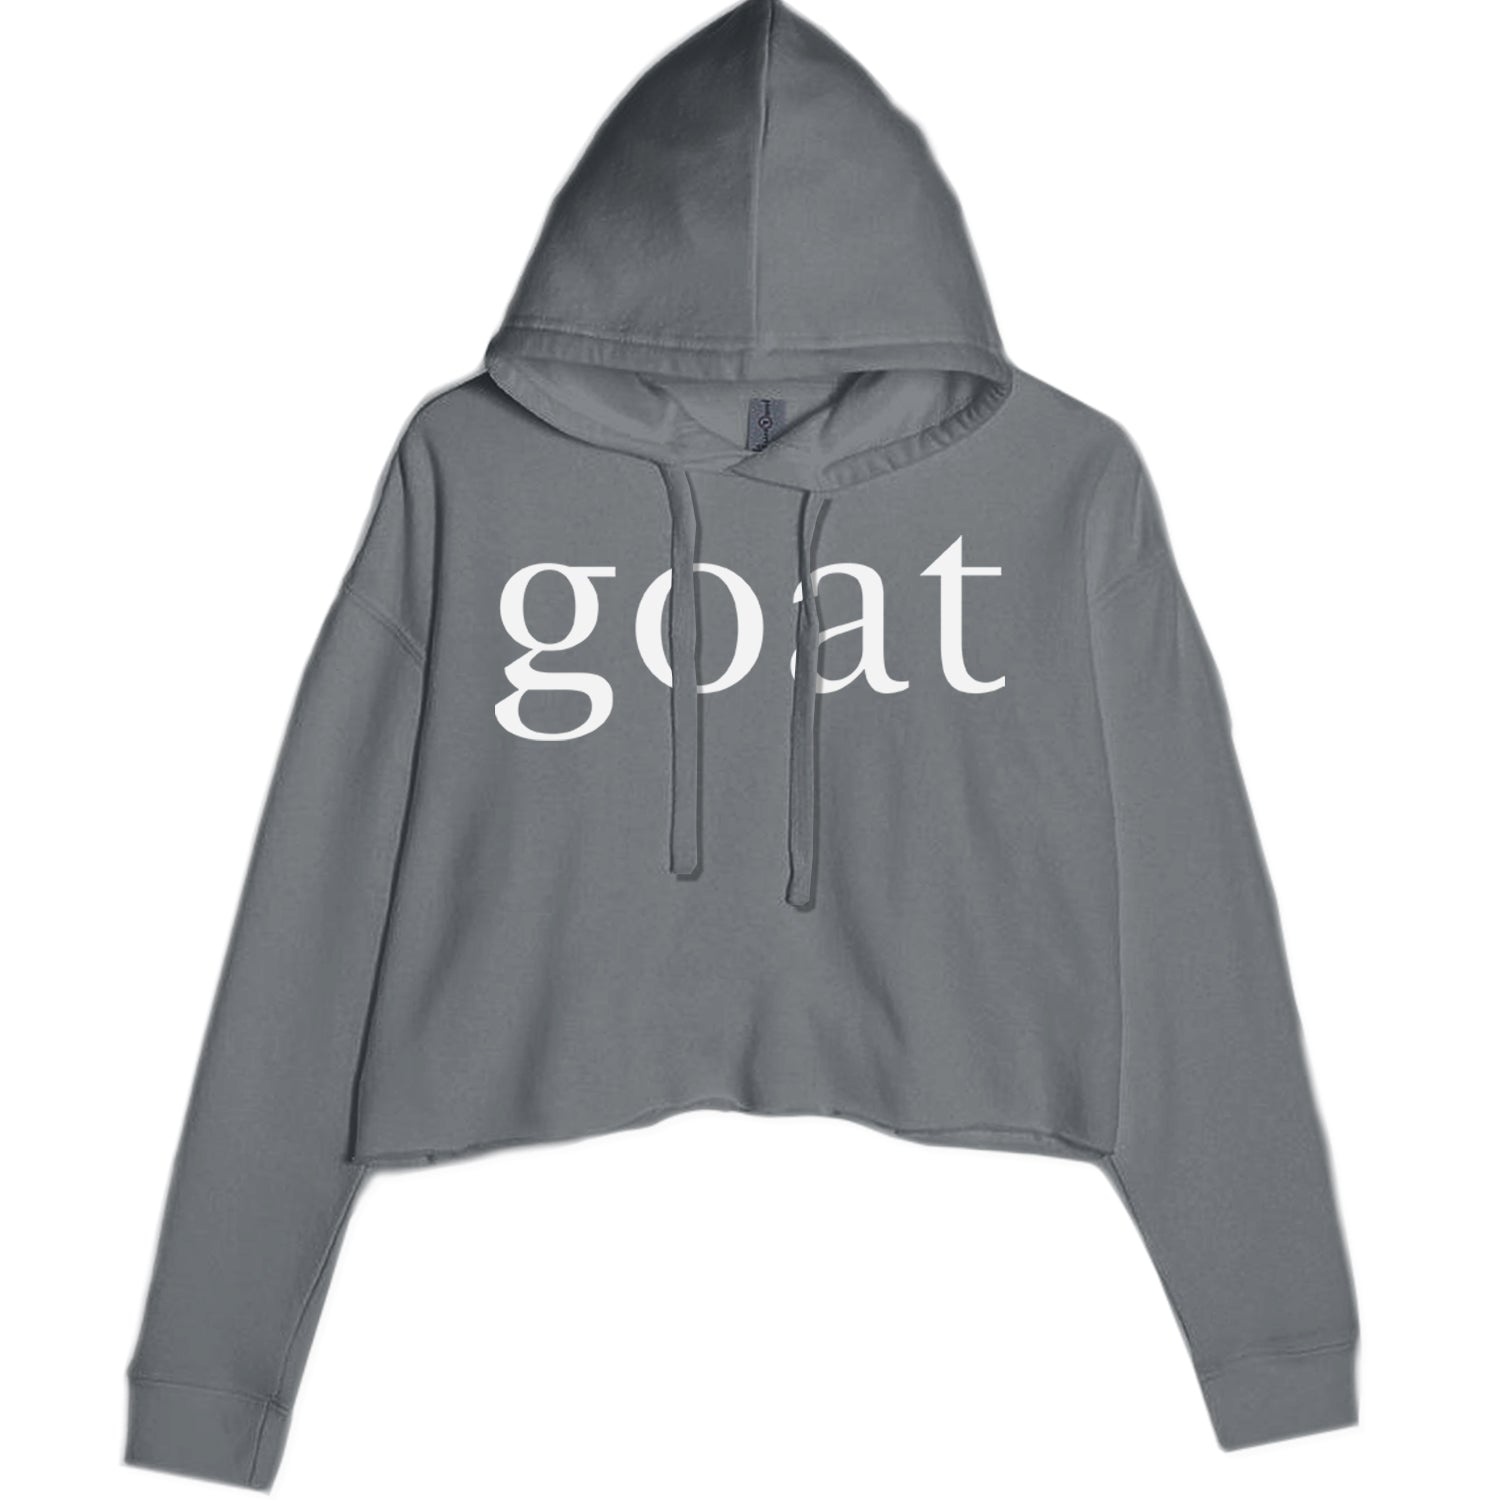 GOAT - Greatest Of All Time  Cropped Hoodie Sweatshirt Charcoal Grey